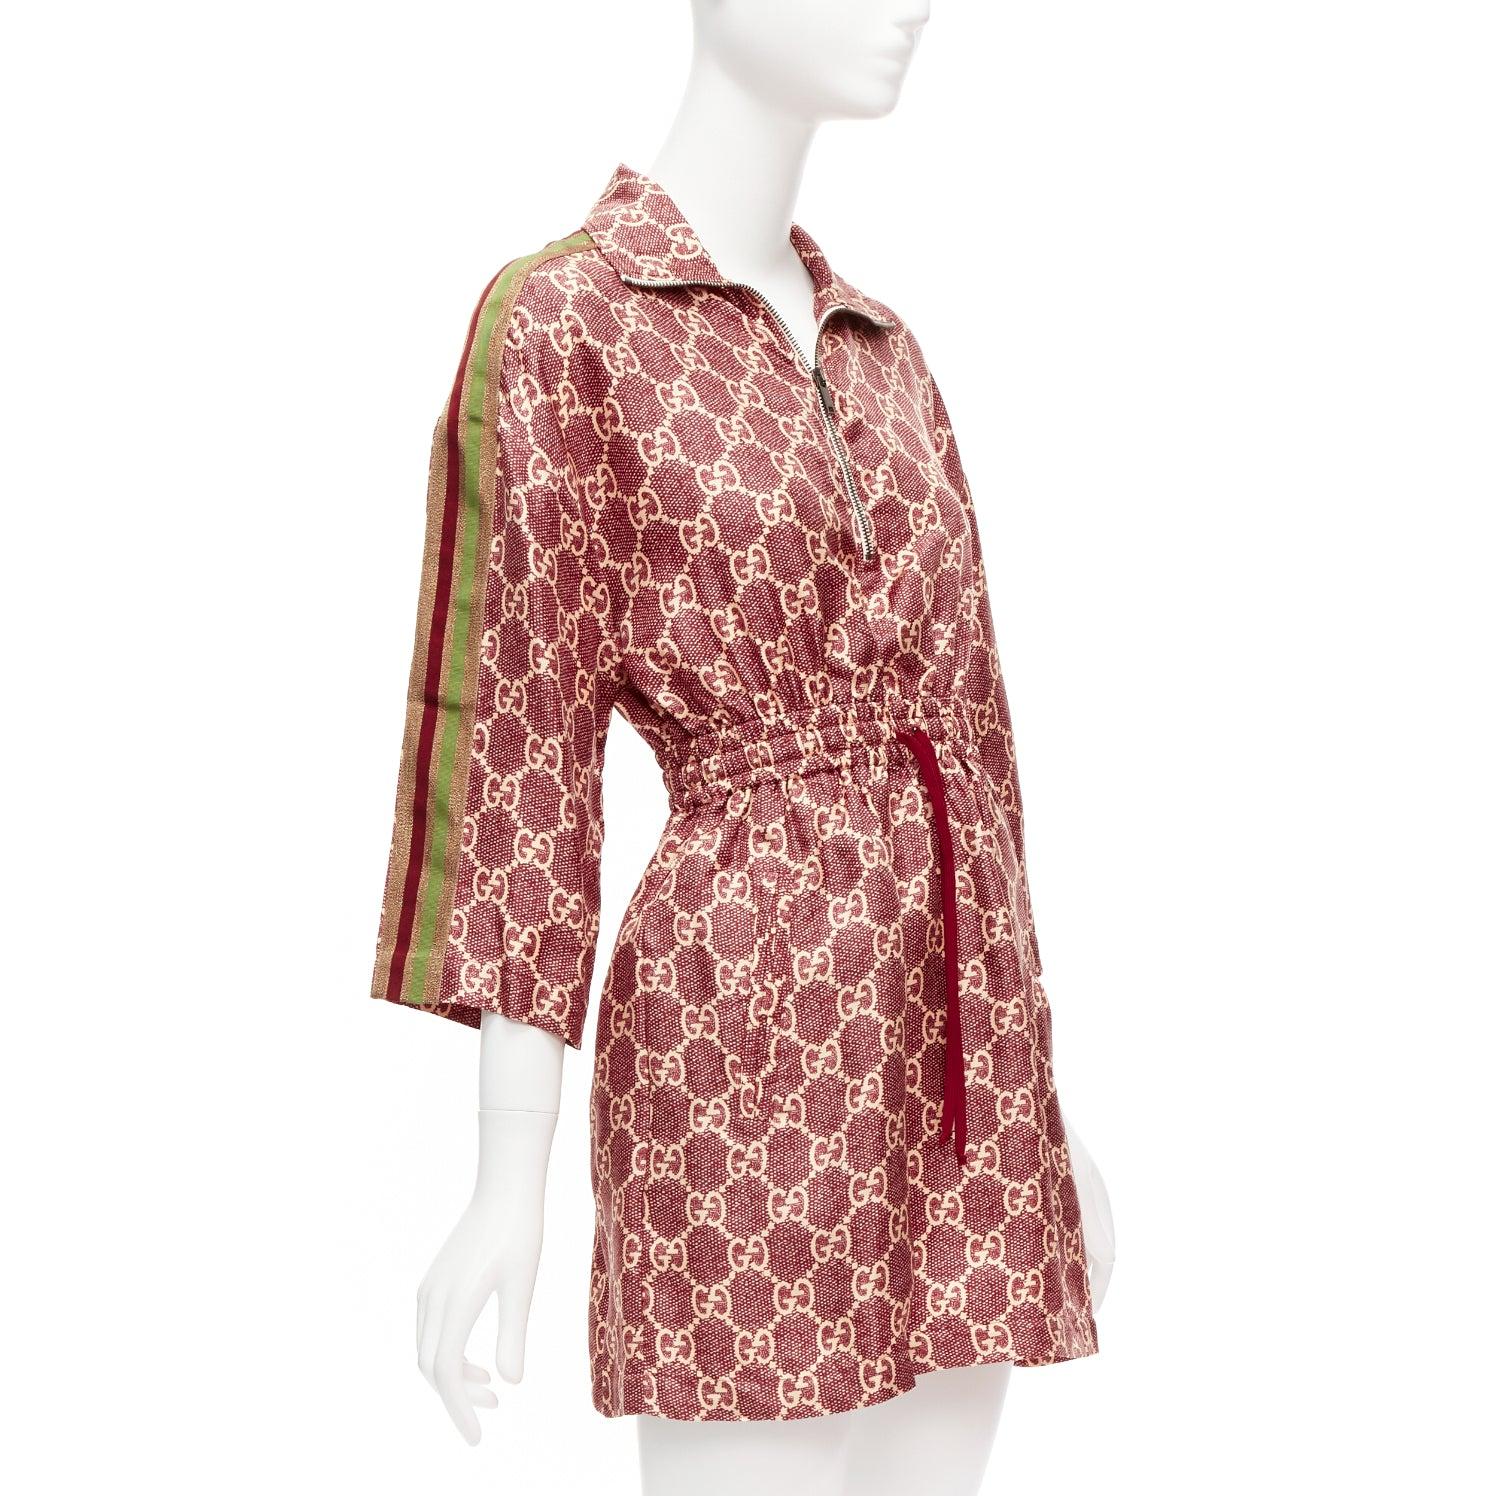 GUCCI 100% silk red beige GG supreme monogram print web trim mini dress XXS
Reference: AAWC/A00695
Brand: Gucci
Designer: Alessandro Michele
Material: 100% Silk
Color: Red, Beige
Pattern: Monogram
Closure: Zip
Lining: Unlined
Extra Details: This red